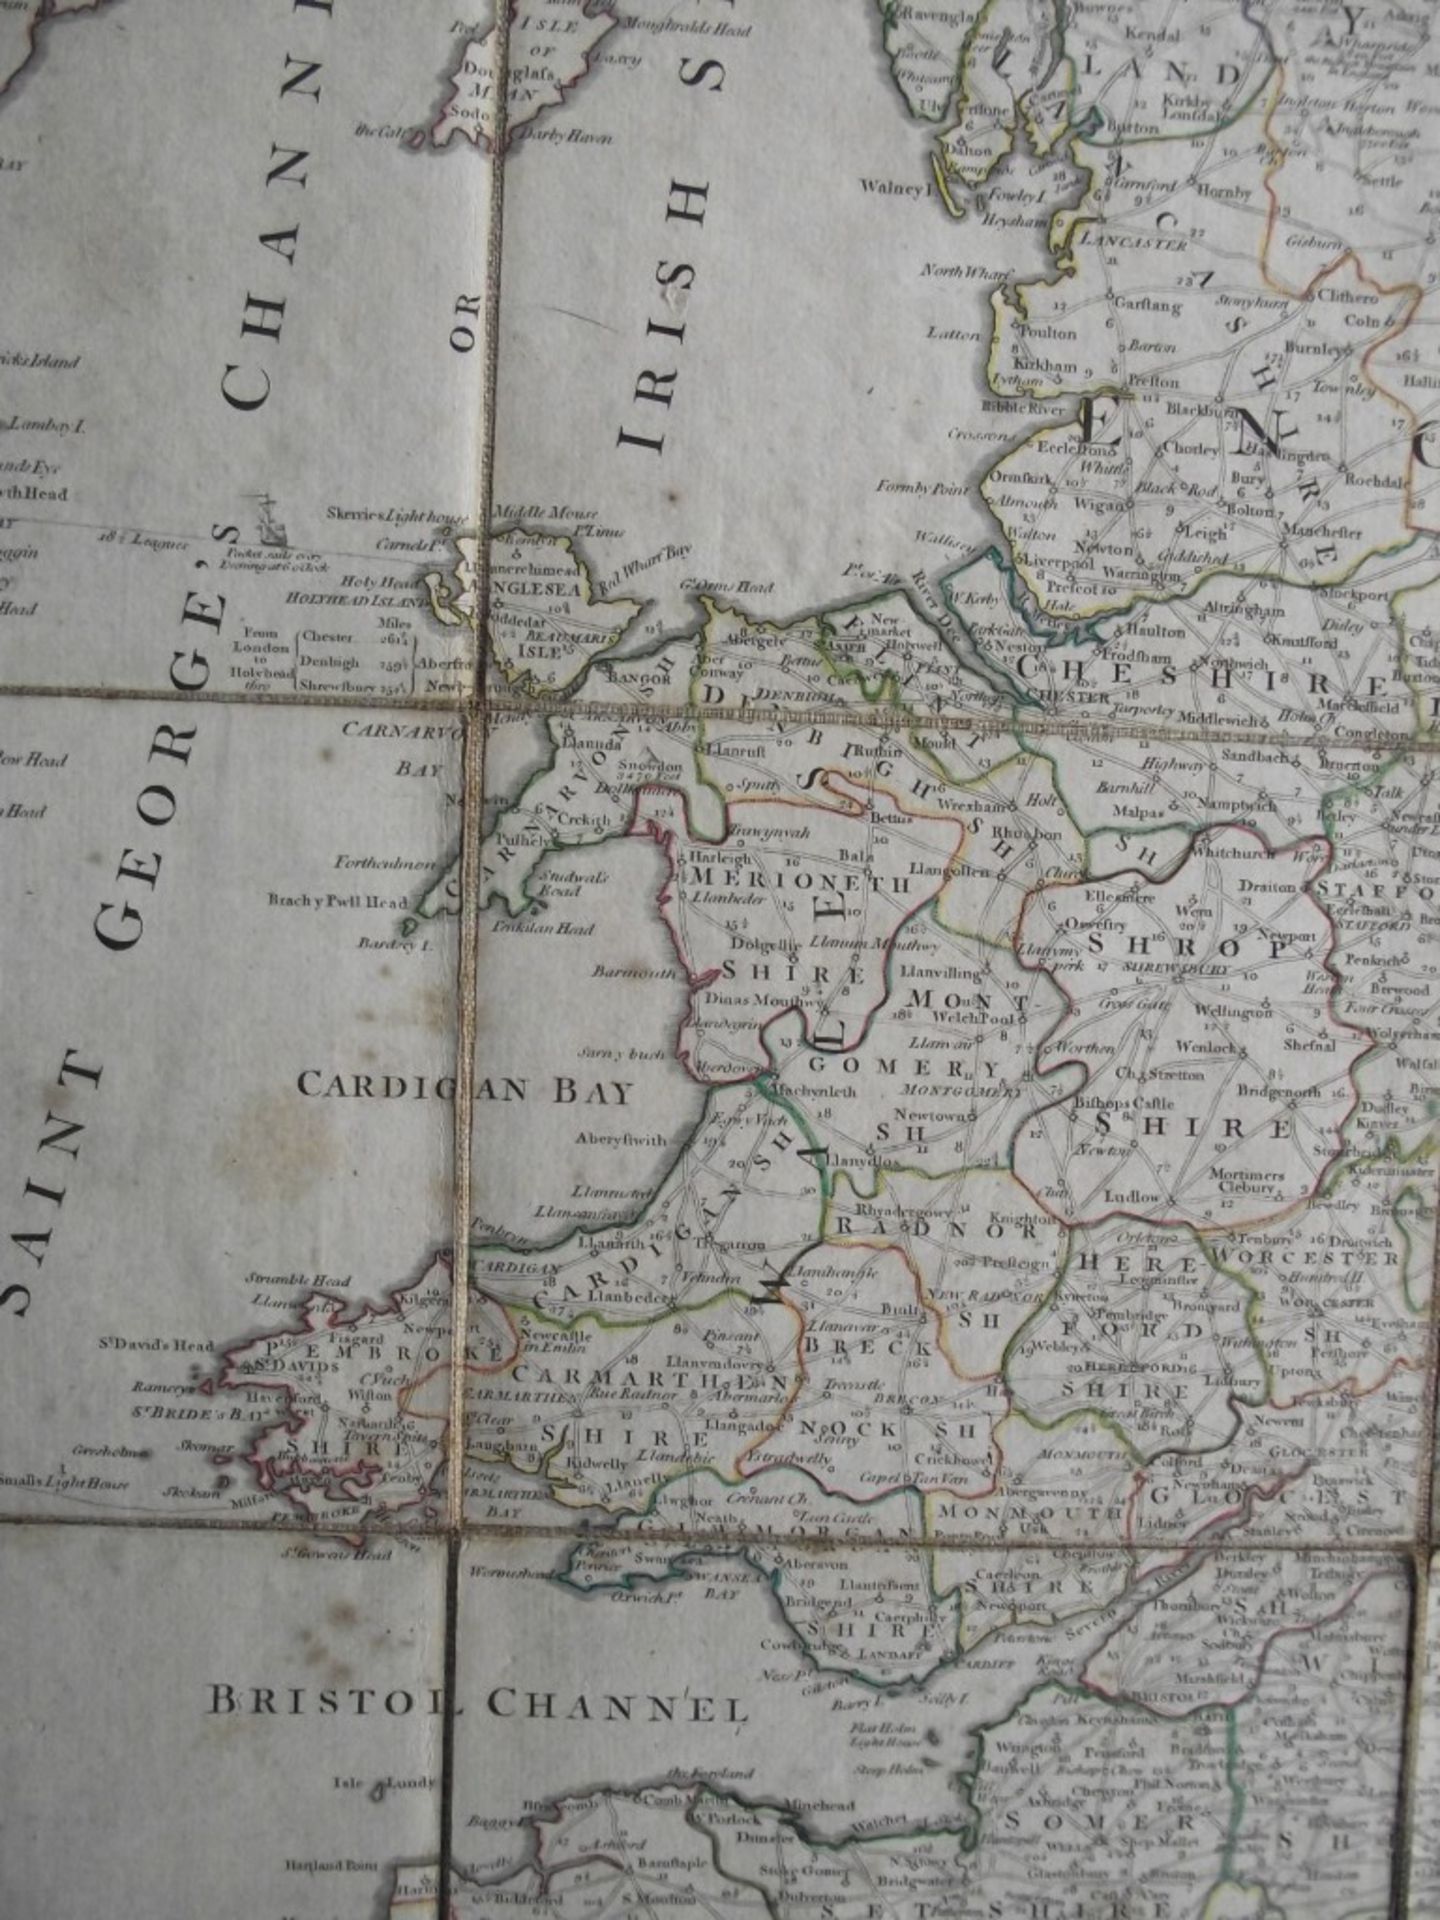 A New Map of The Roads of England and Scotland - Laurie & Whittle - 1794 - With Original Case - Image 26 of 32